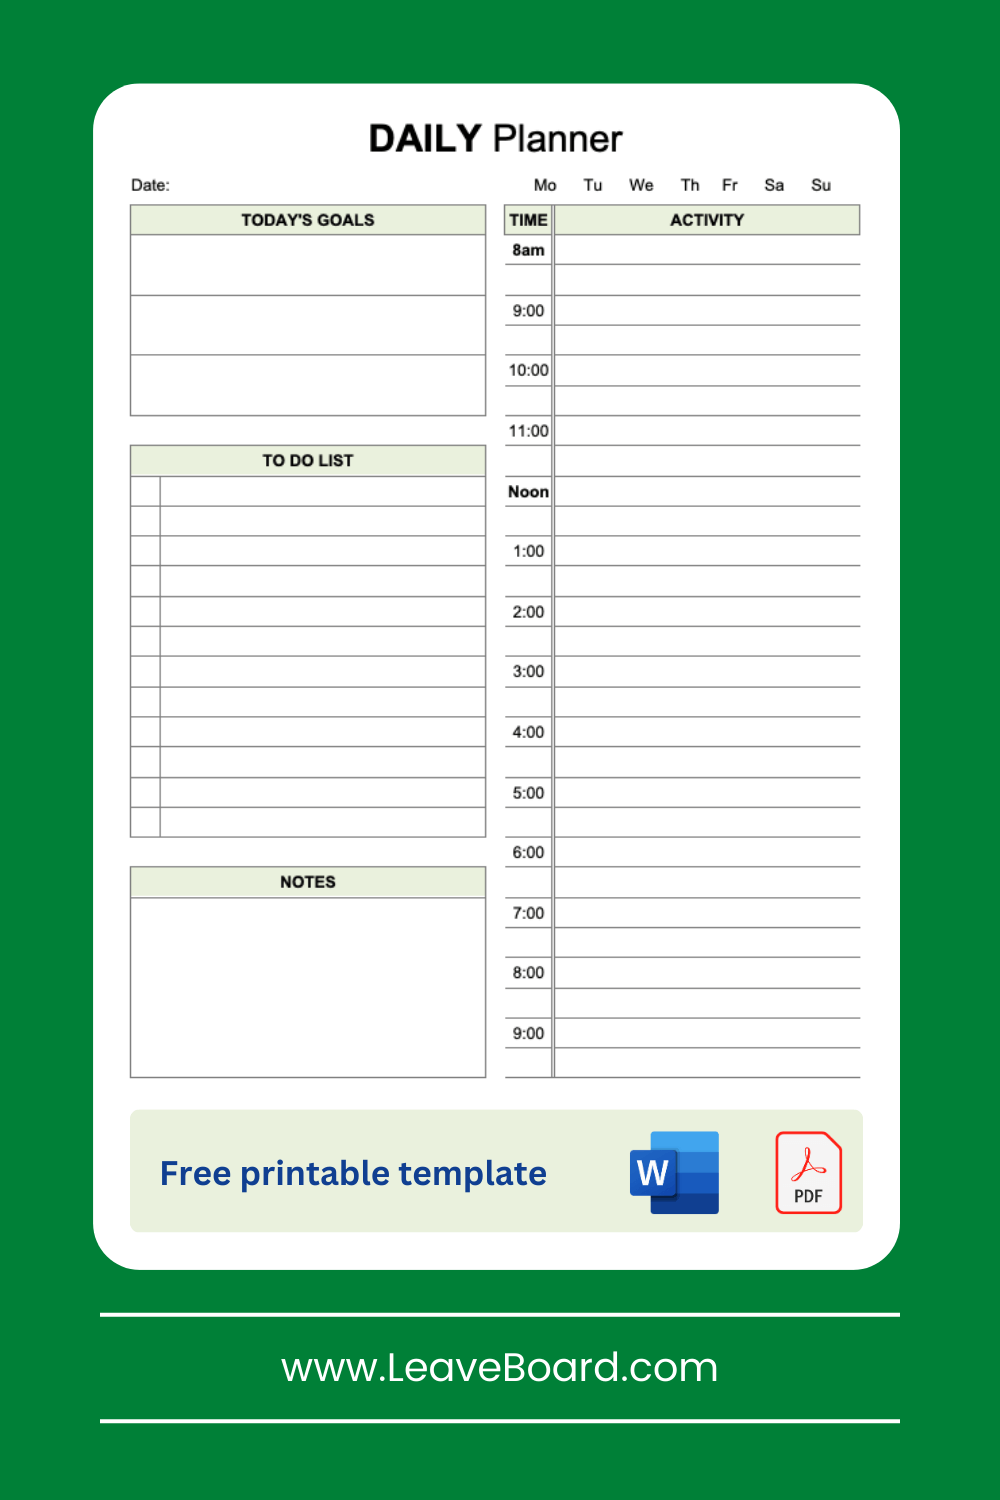 Daily planner printable template